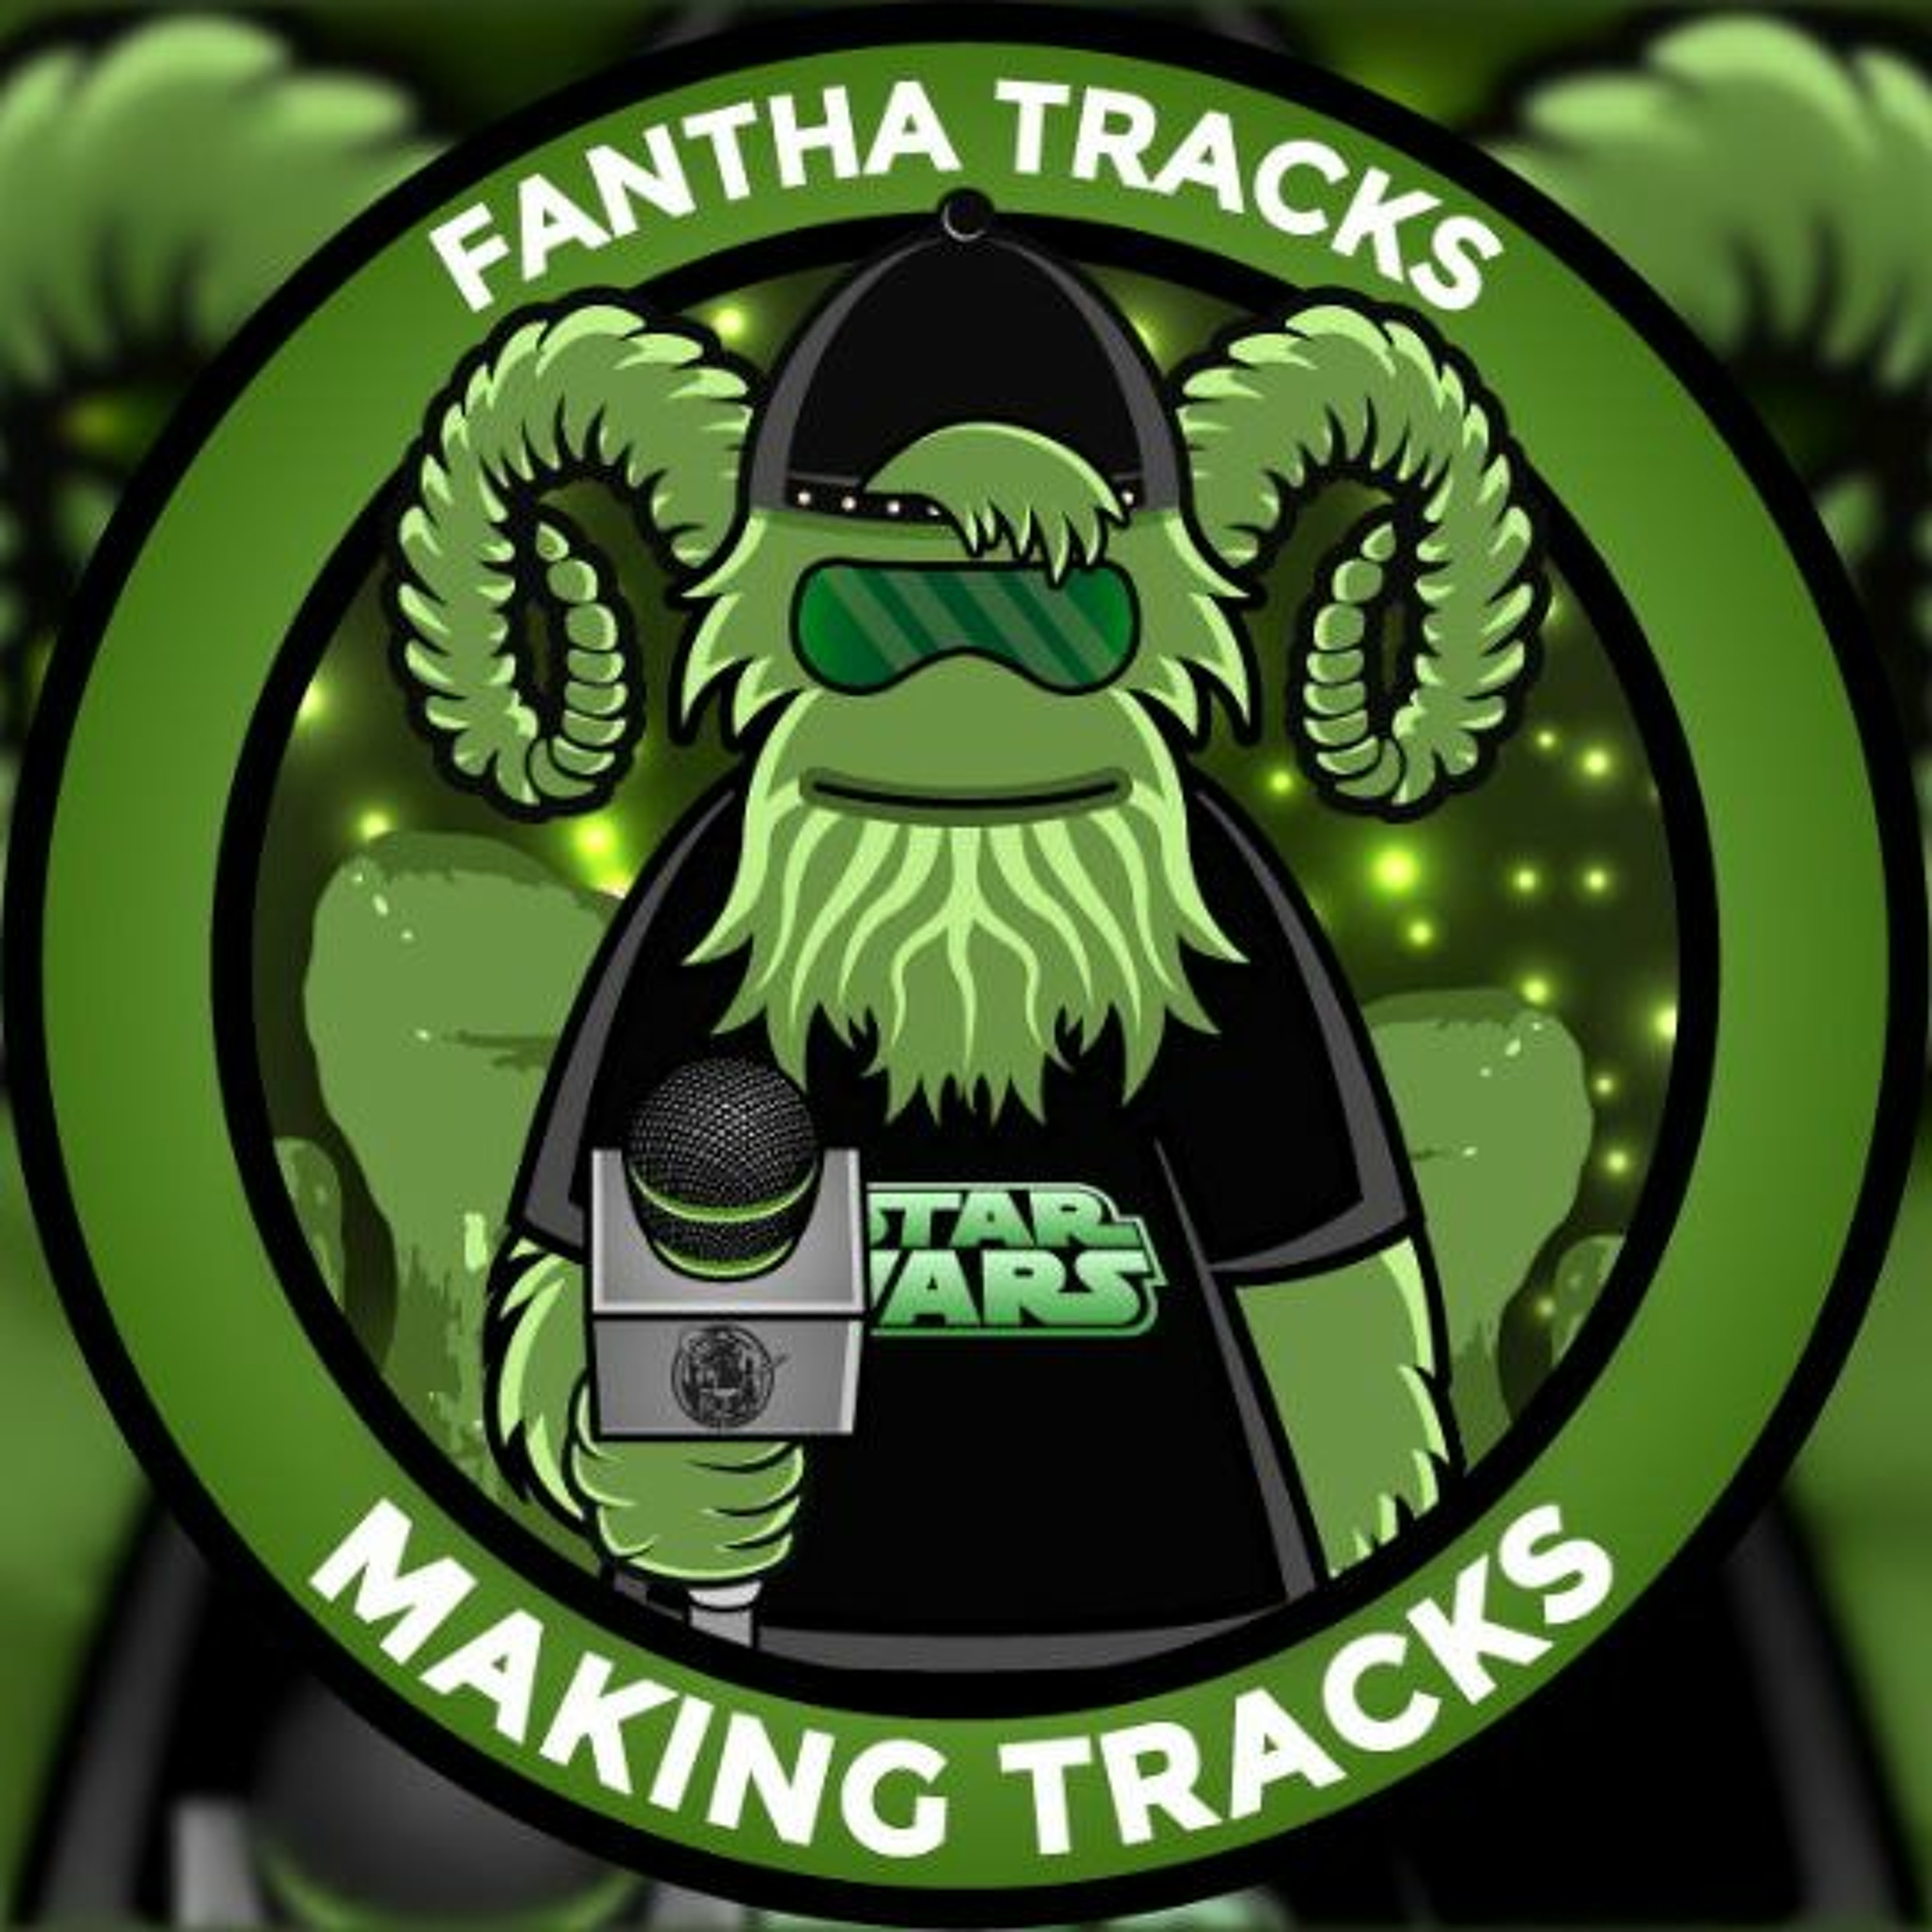 Making Tracks Episode 142: Grooming Habits: With guest Dermot Crowley